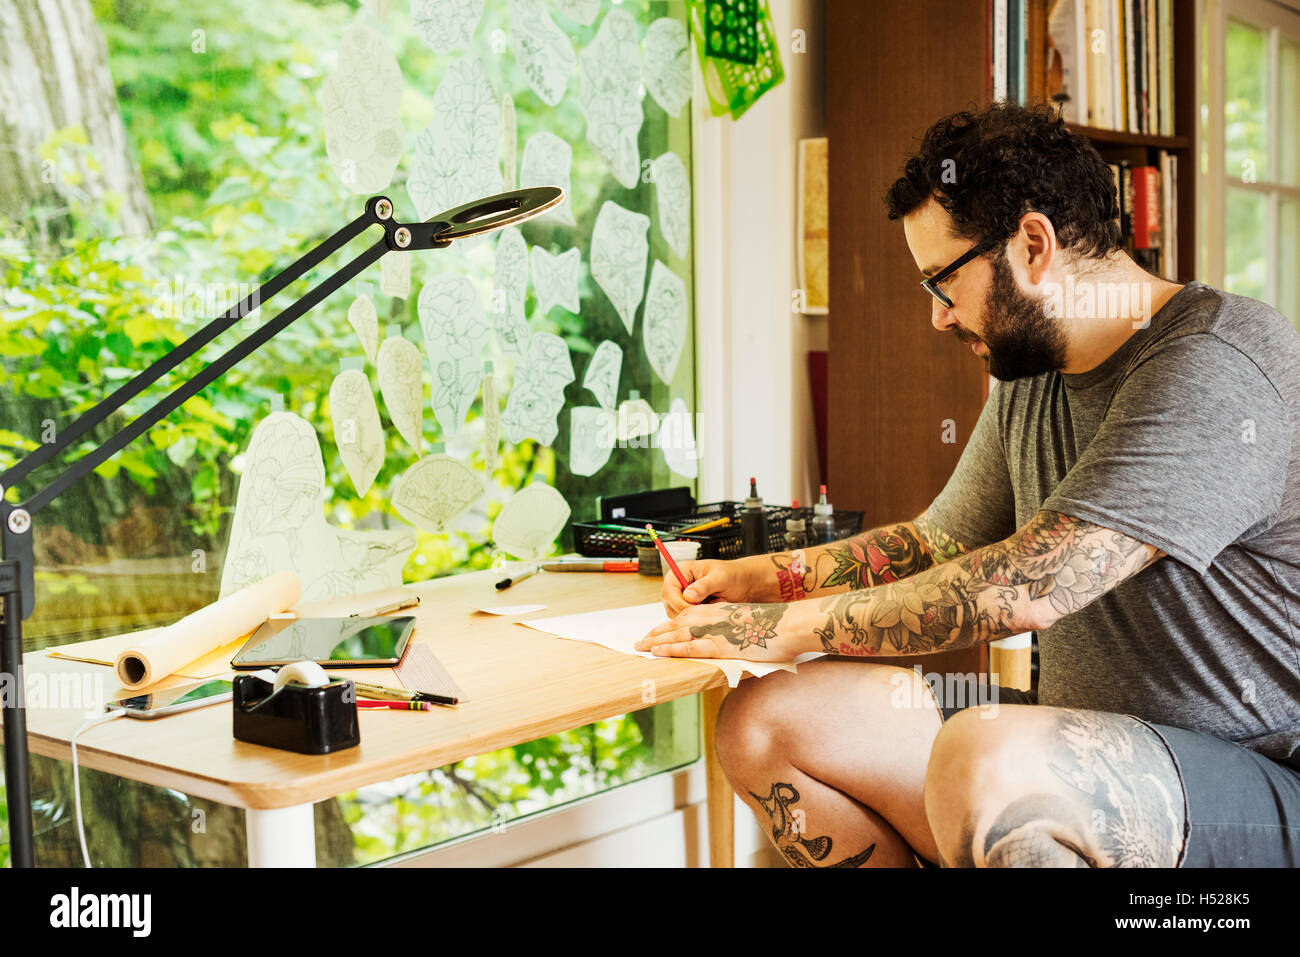 Bearded man with tattoos on his arms and legs sitting at a desk, drawing. Stock Photo